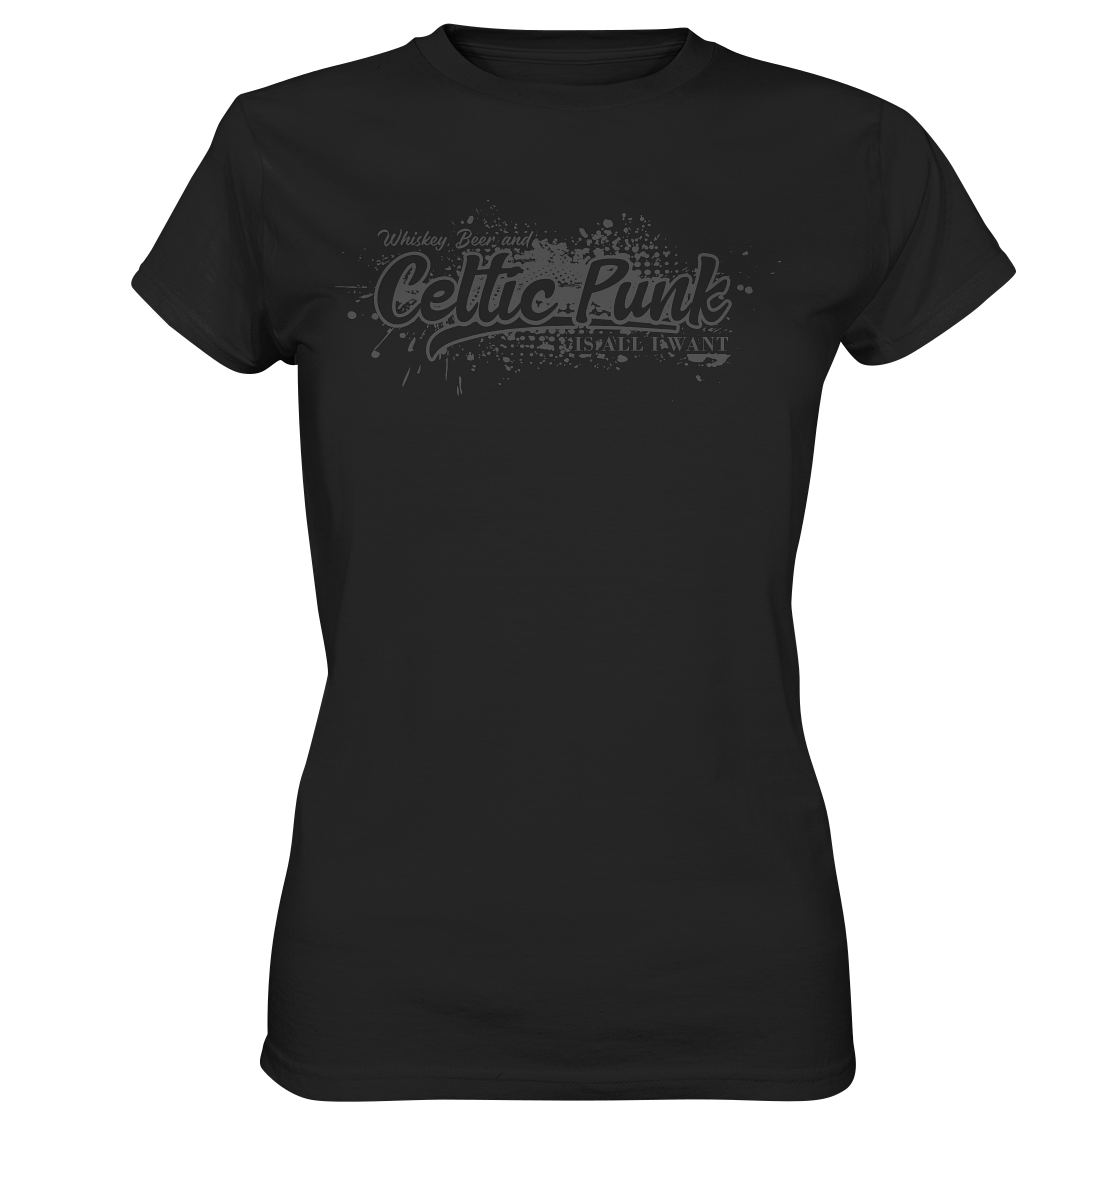 Whiskey, Beer And Celtic Punk "Is All I Want" - Ladies Premium Shirt